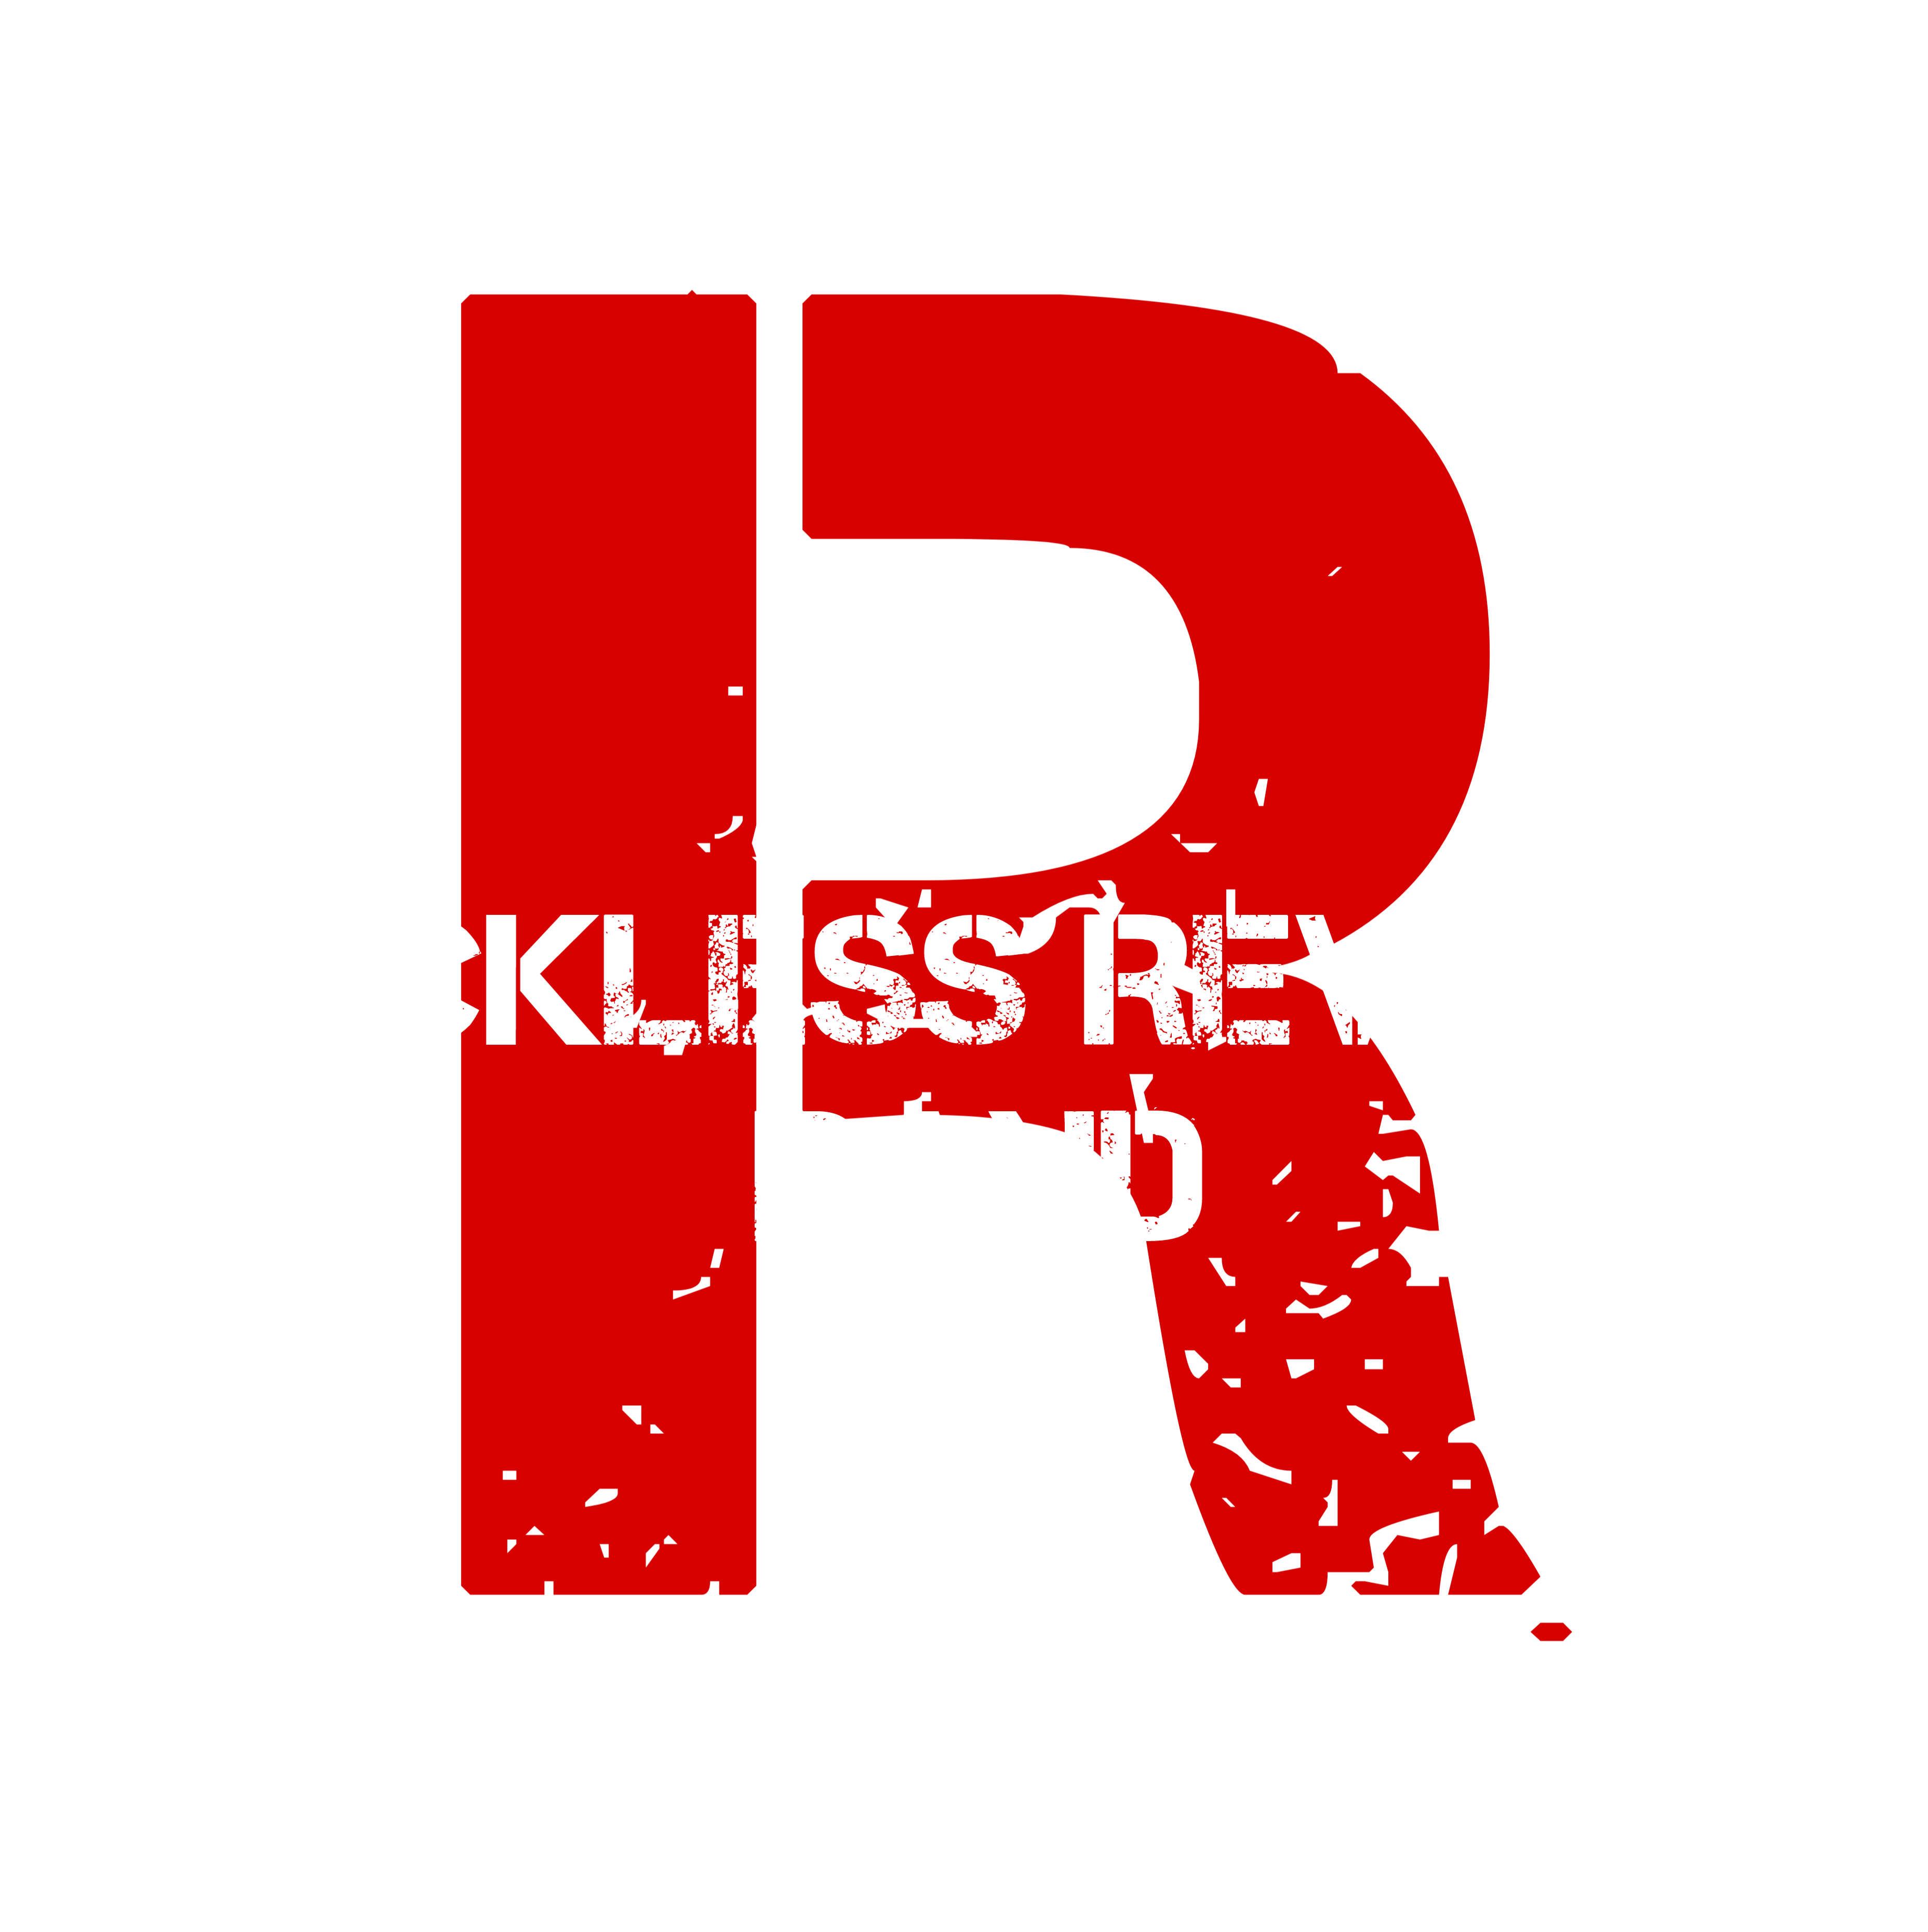 The Reckless Revival Band